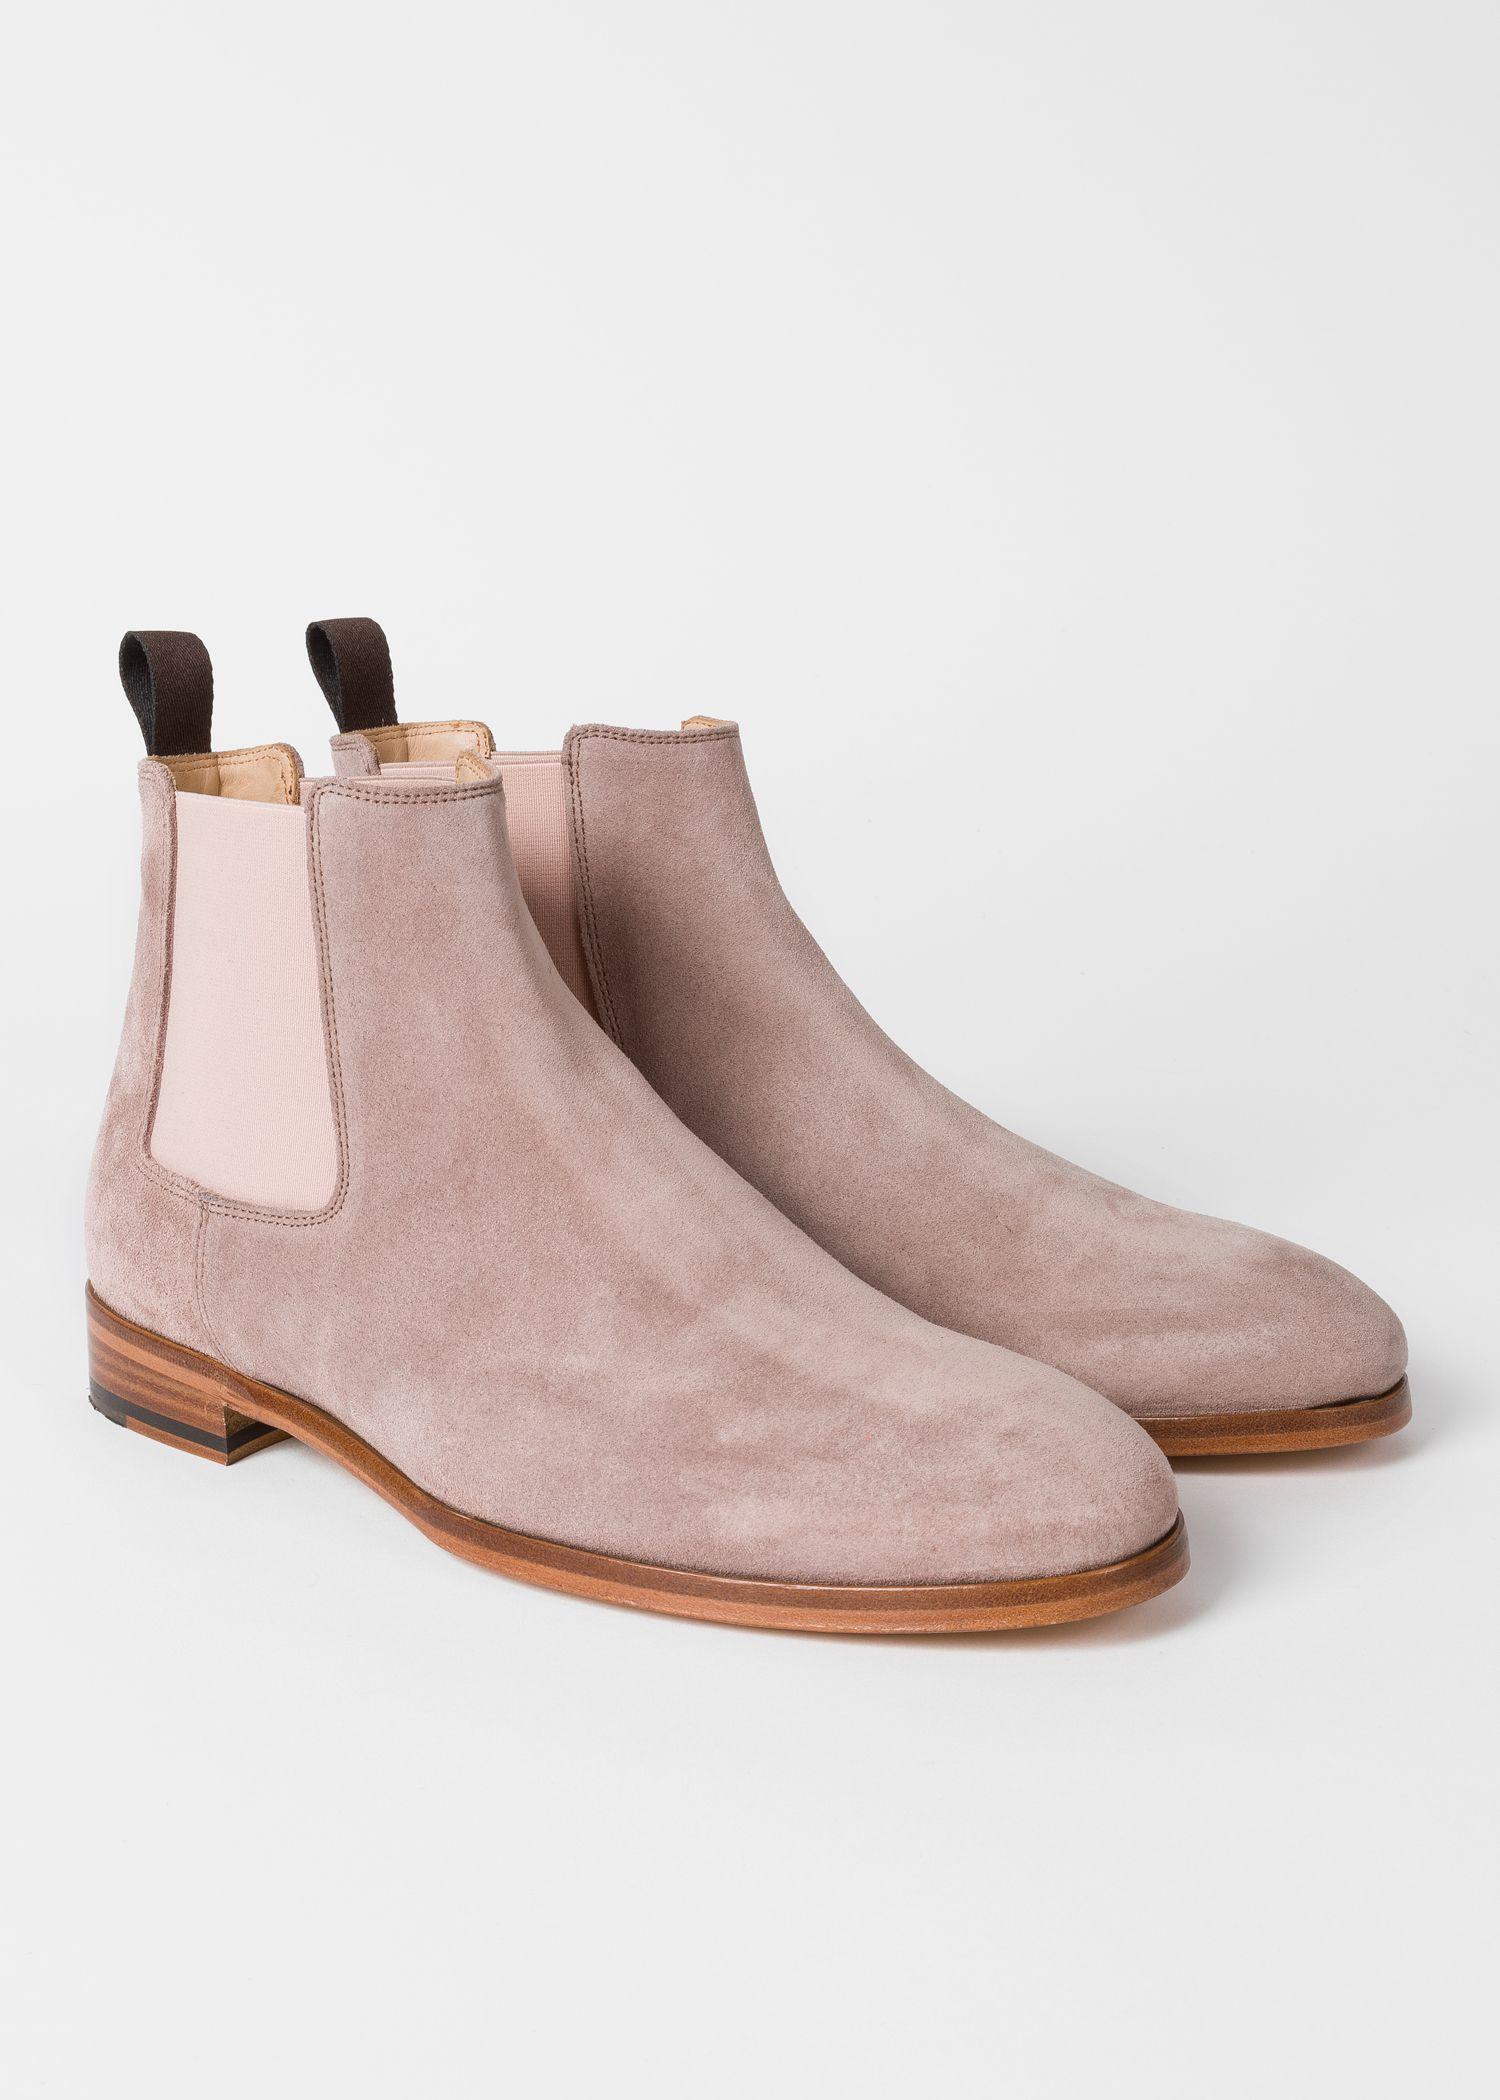 Paul Smith Dusky Pink Suede 'crown' Chelsea Boots for Men - Lyst